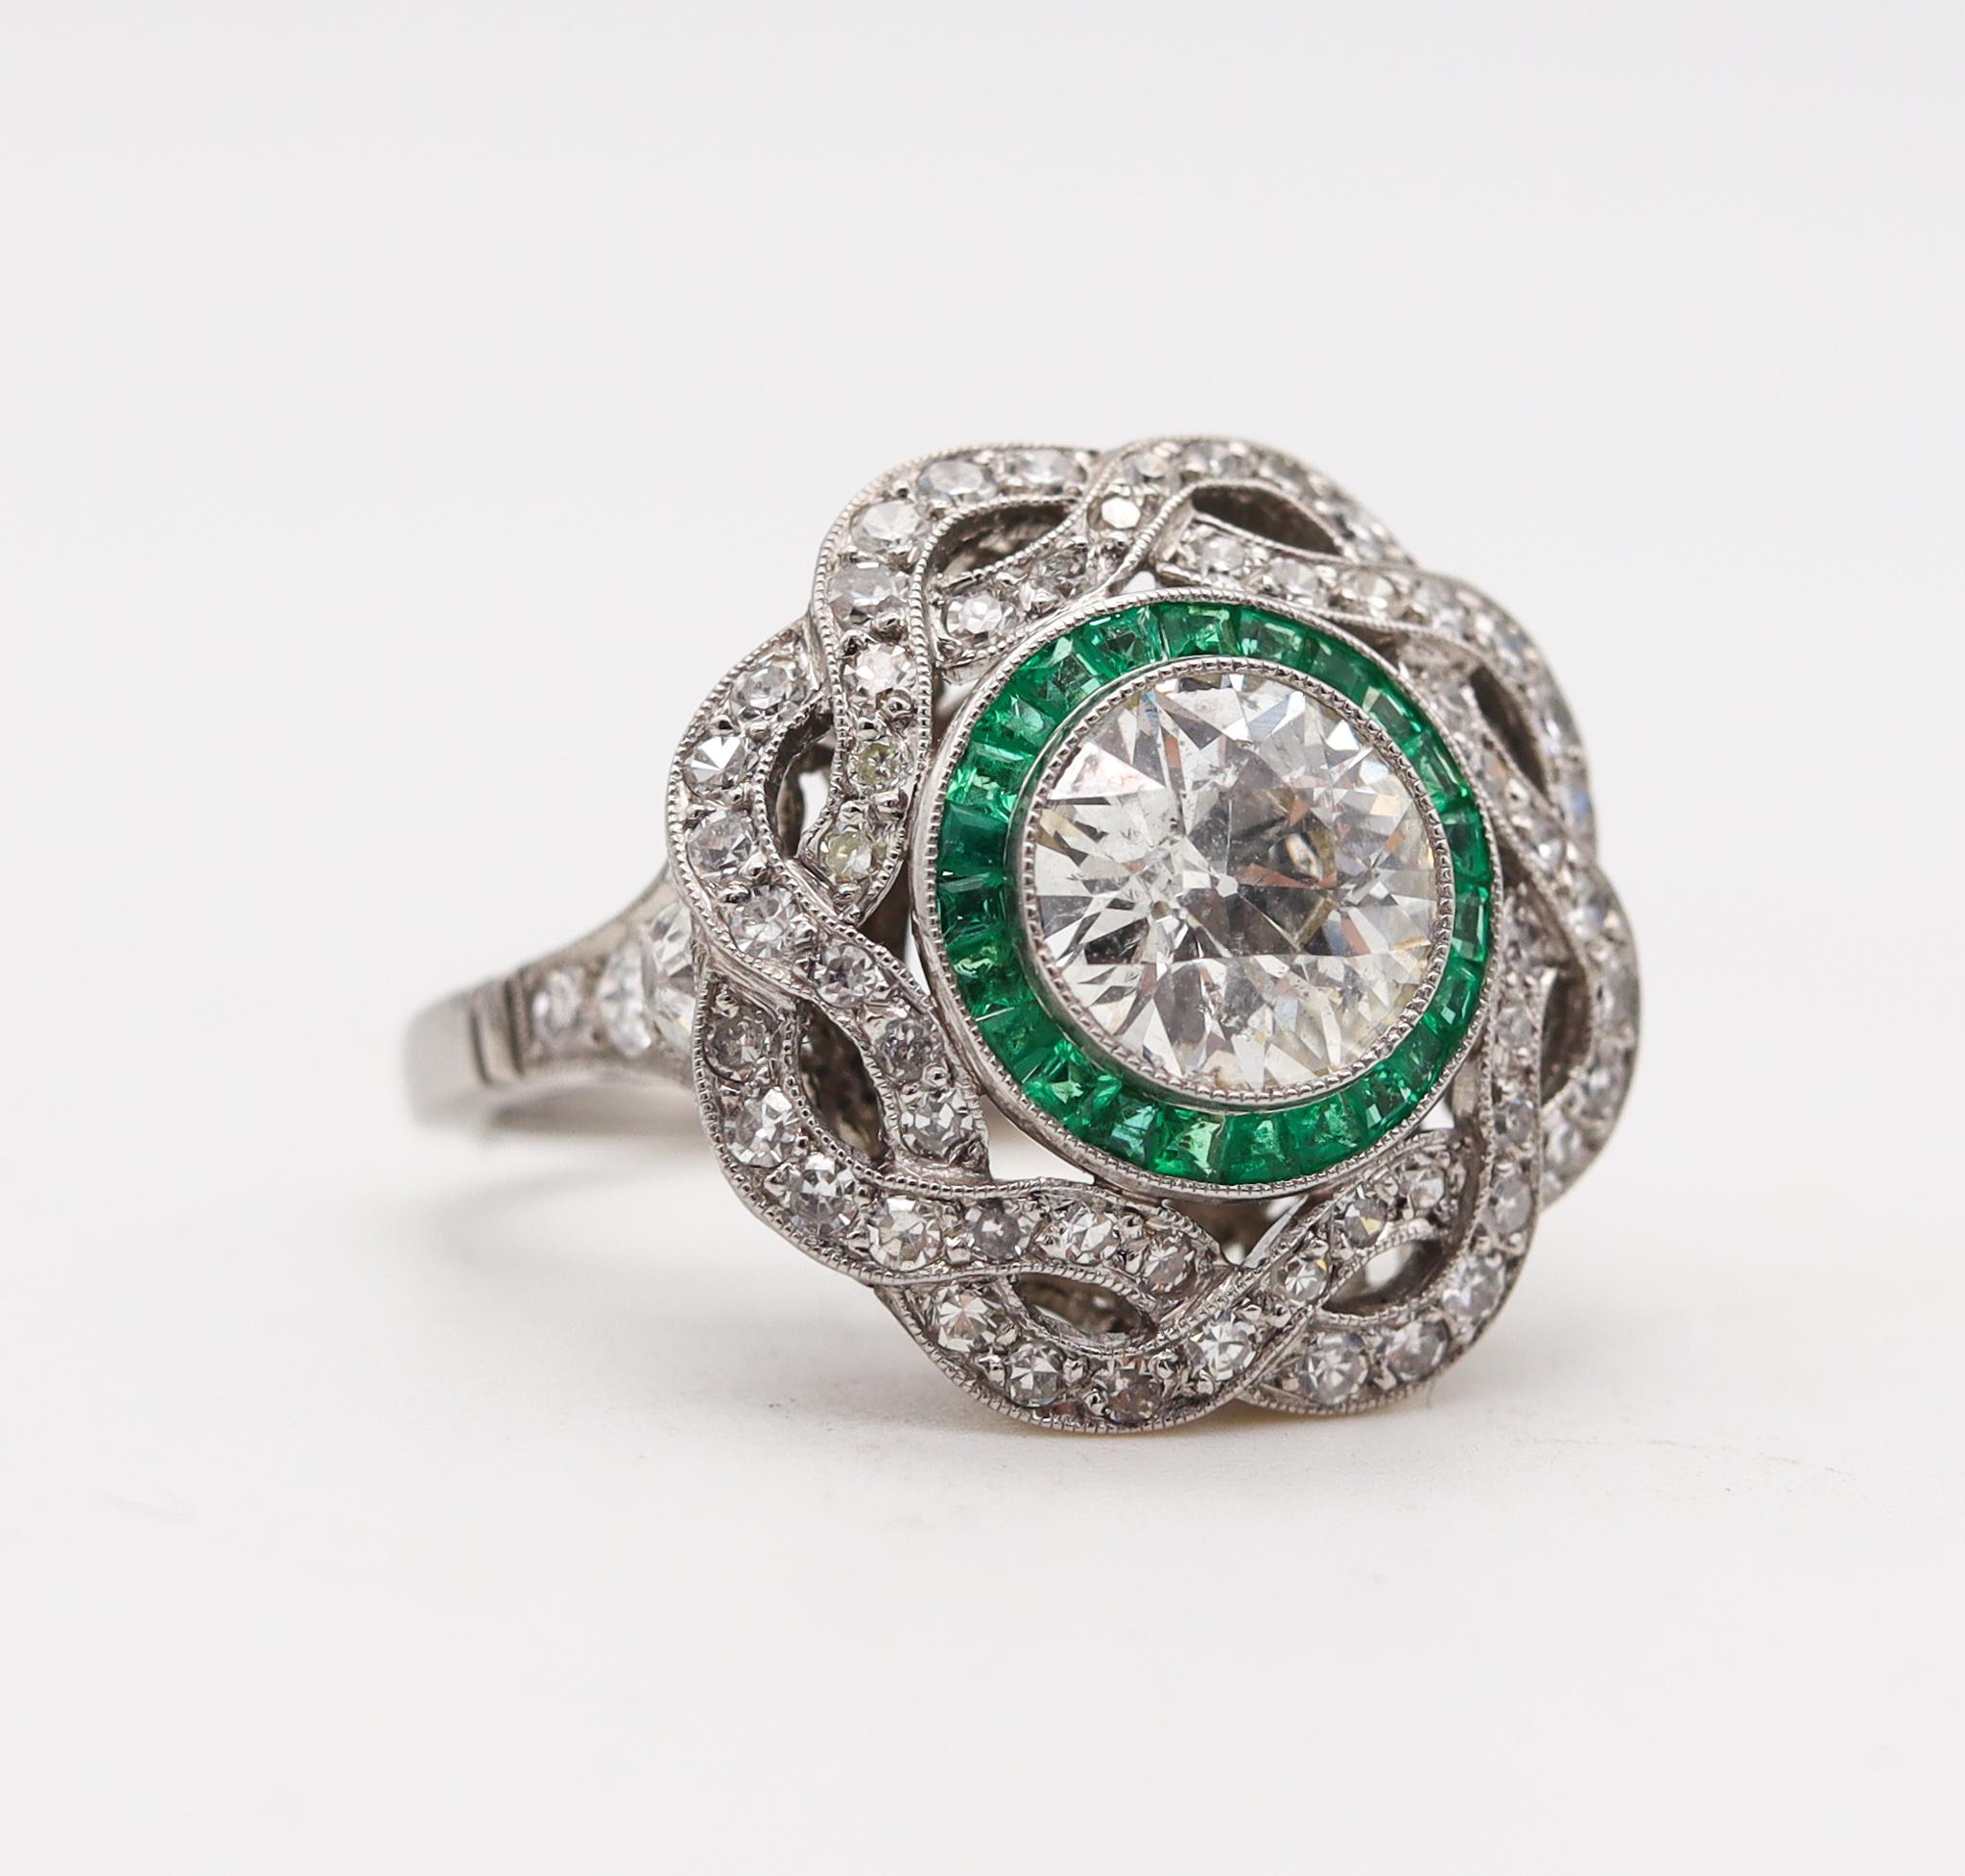 Women's Art Deco Classic Halo Ring in Platinum with 3.23 Ctw in Diamonds and Emeralds